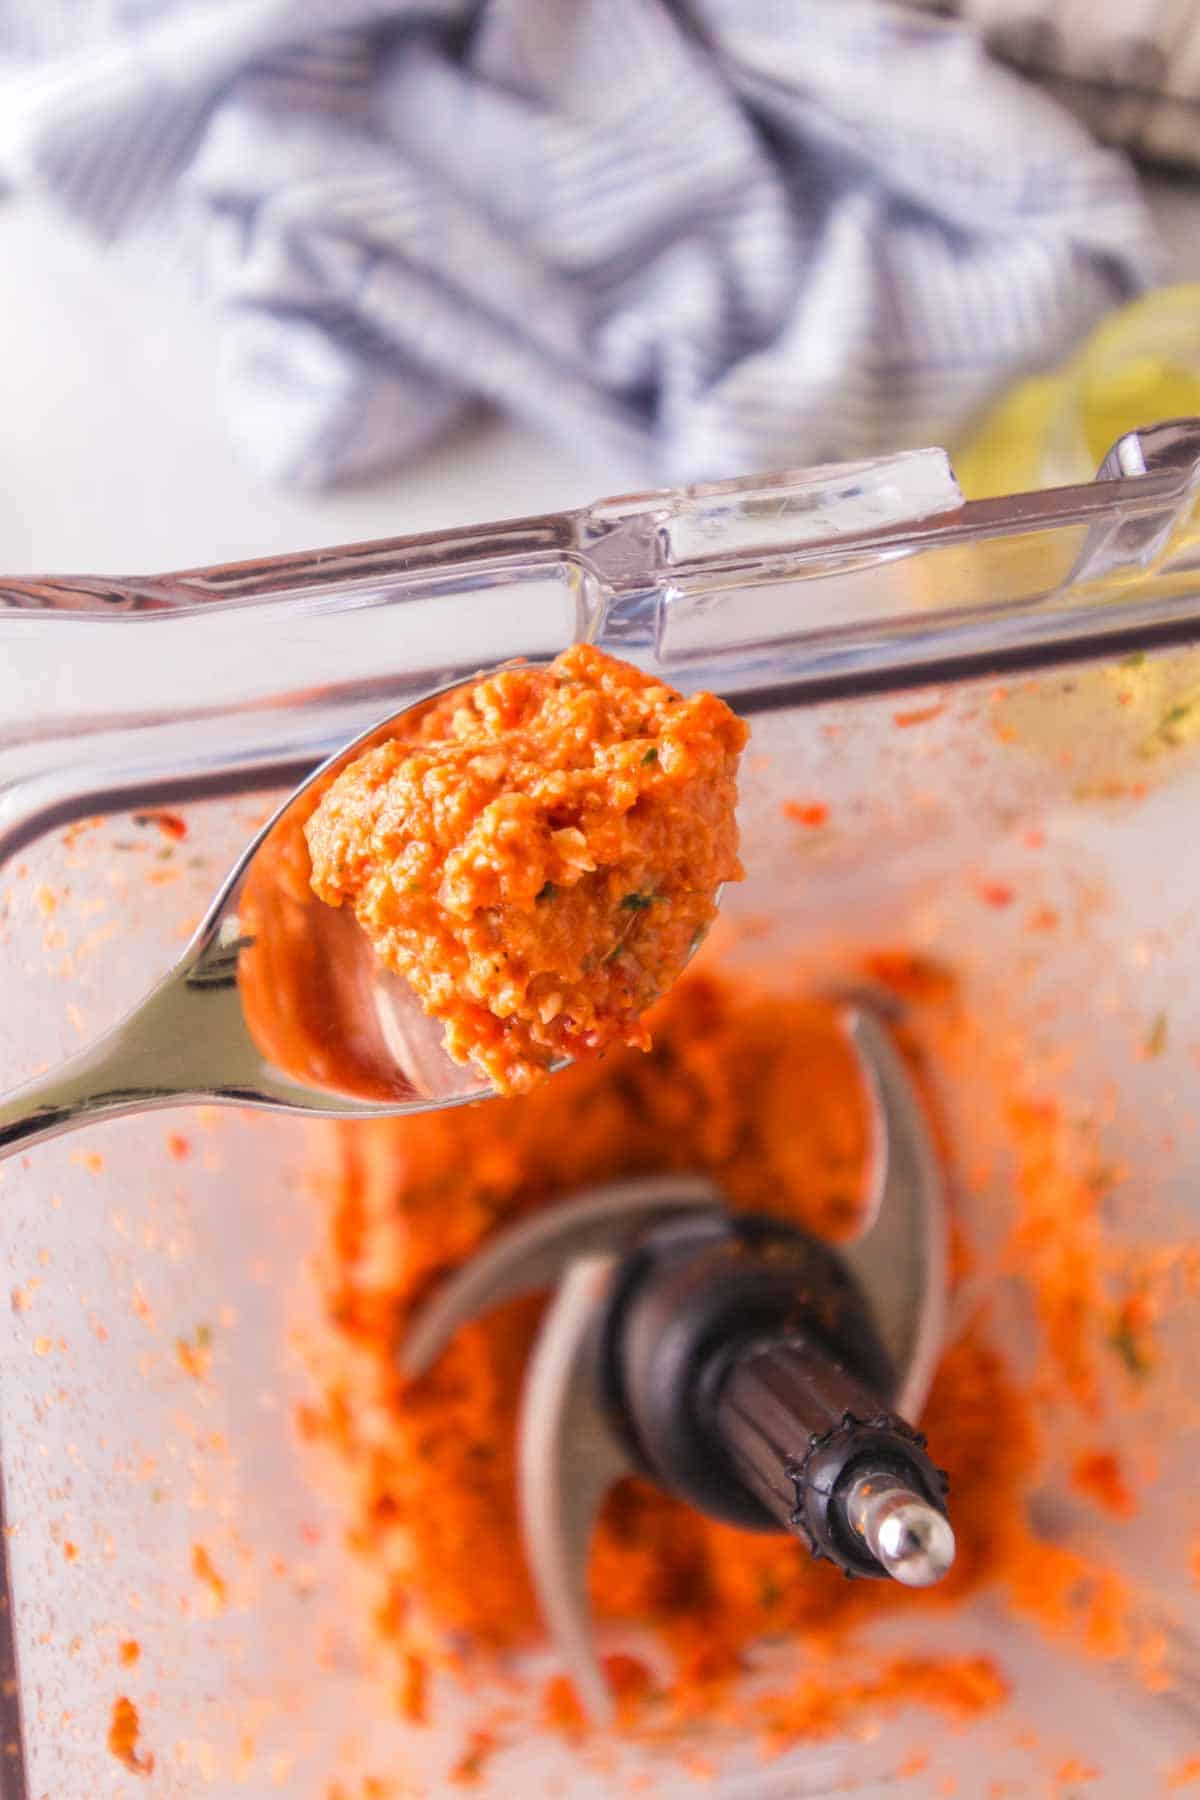 POV spoonful over a top view of a blender for romesco sauce